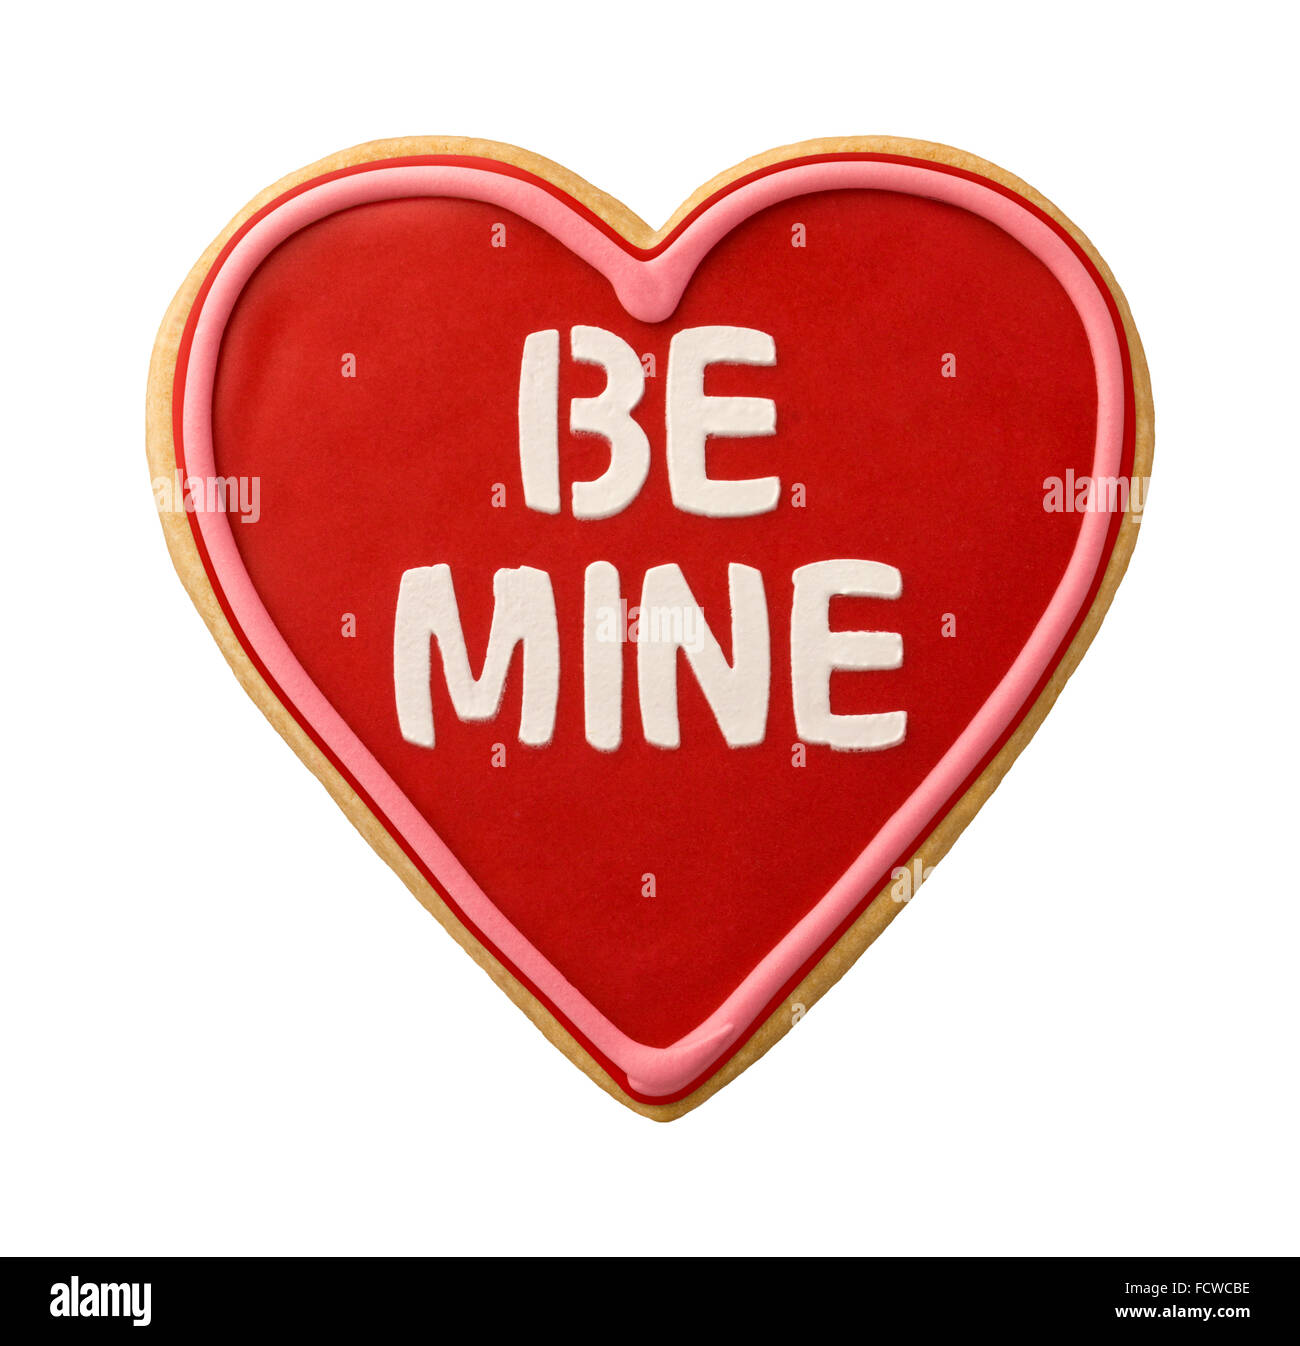 Be Mine Heart Shaped Valentine Cookie isolated, with  icing. Stock Photo